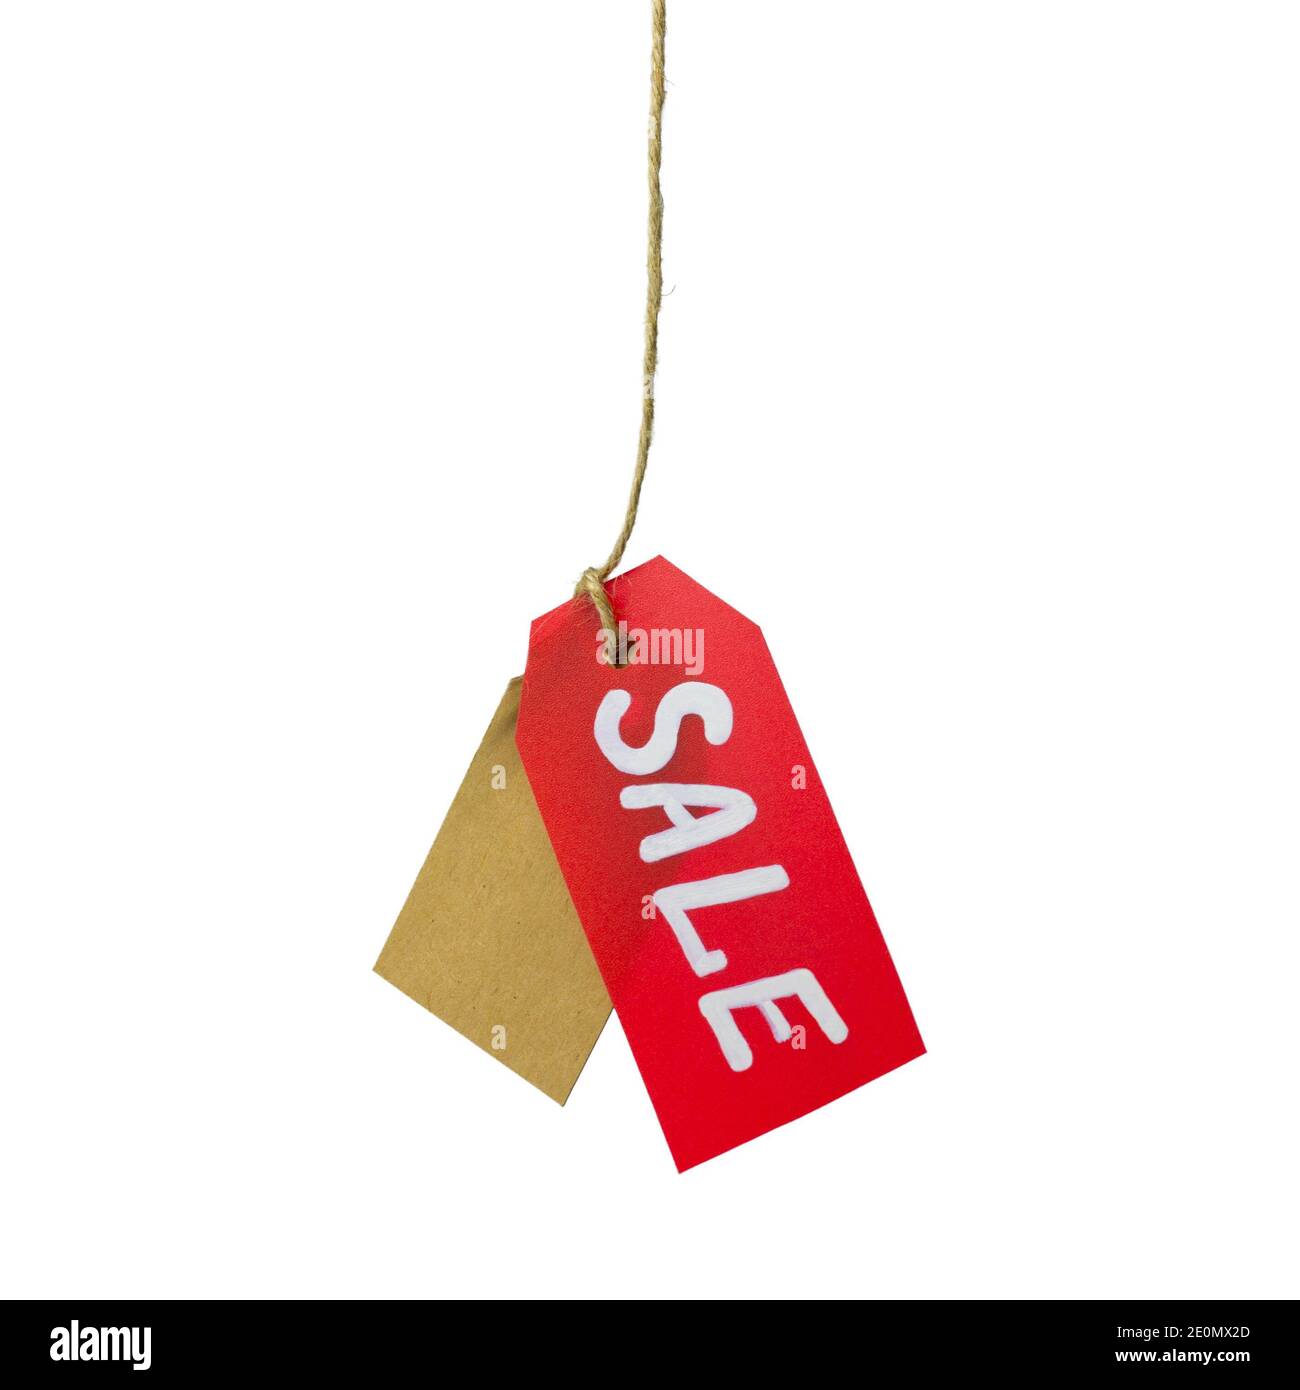 Red Hanging Pricing Tags Or Labels With White Prices Stock Illustration -  Download Image Now - iStock